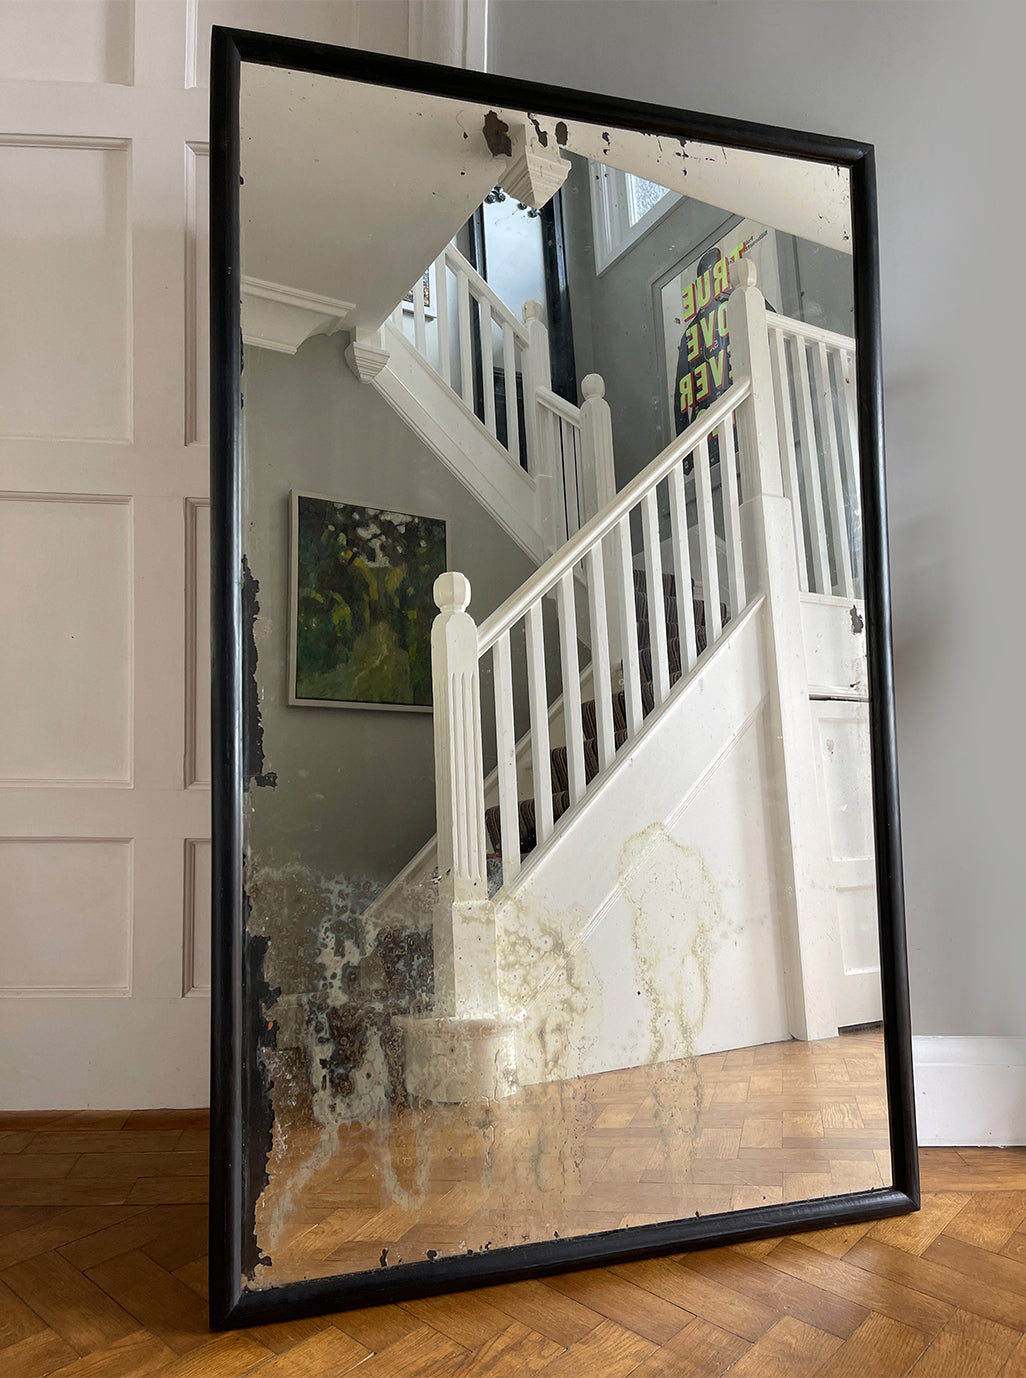 An impressive large and heavily foxed vintage mirror with a waxed black ebonised wooden frame - SHOP NOW - www.intovintage.co.uk